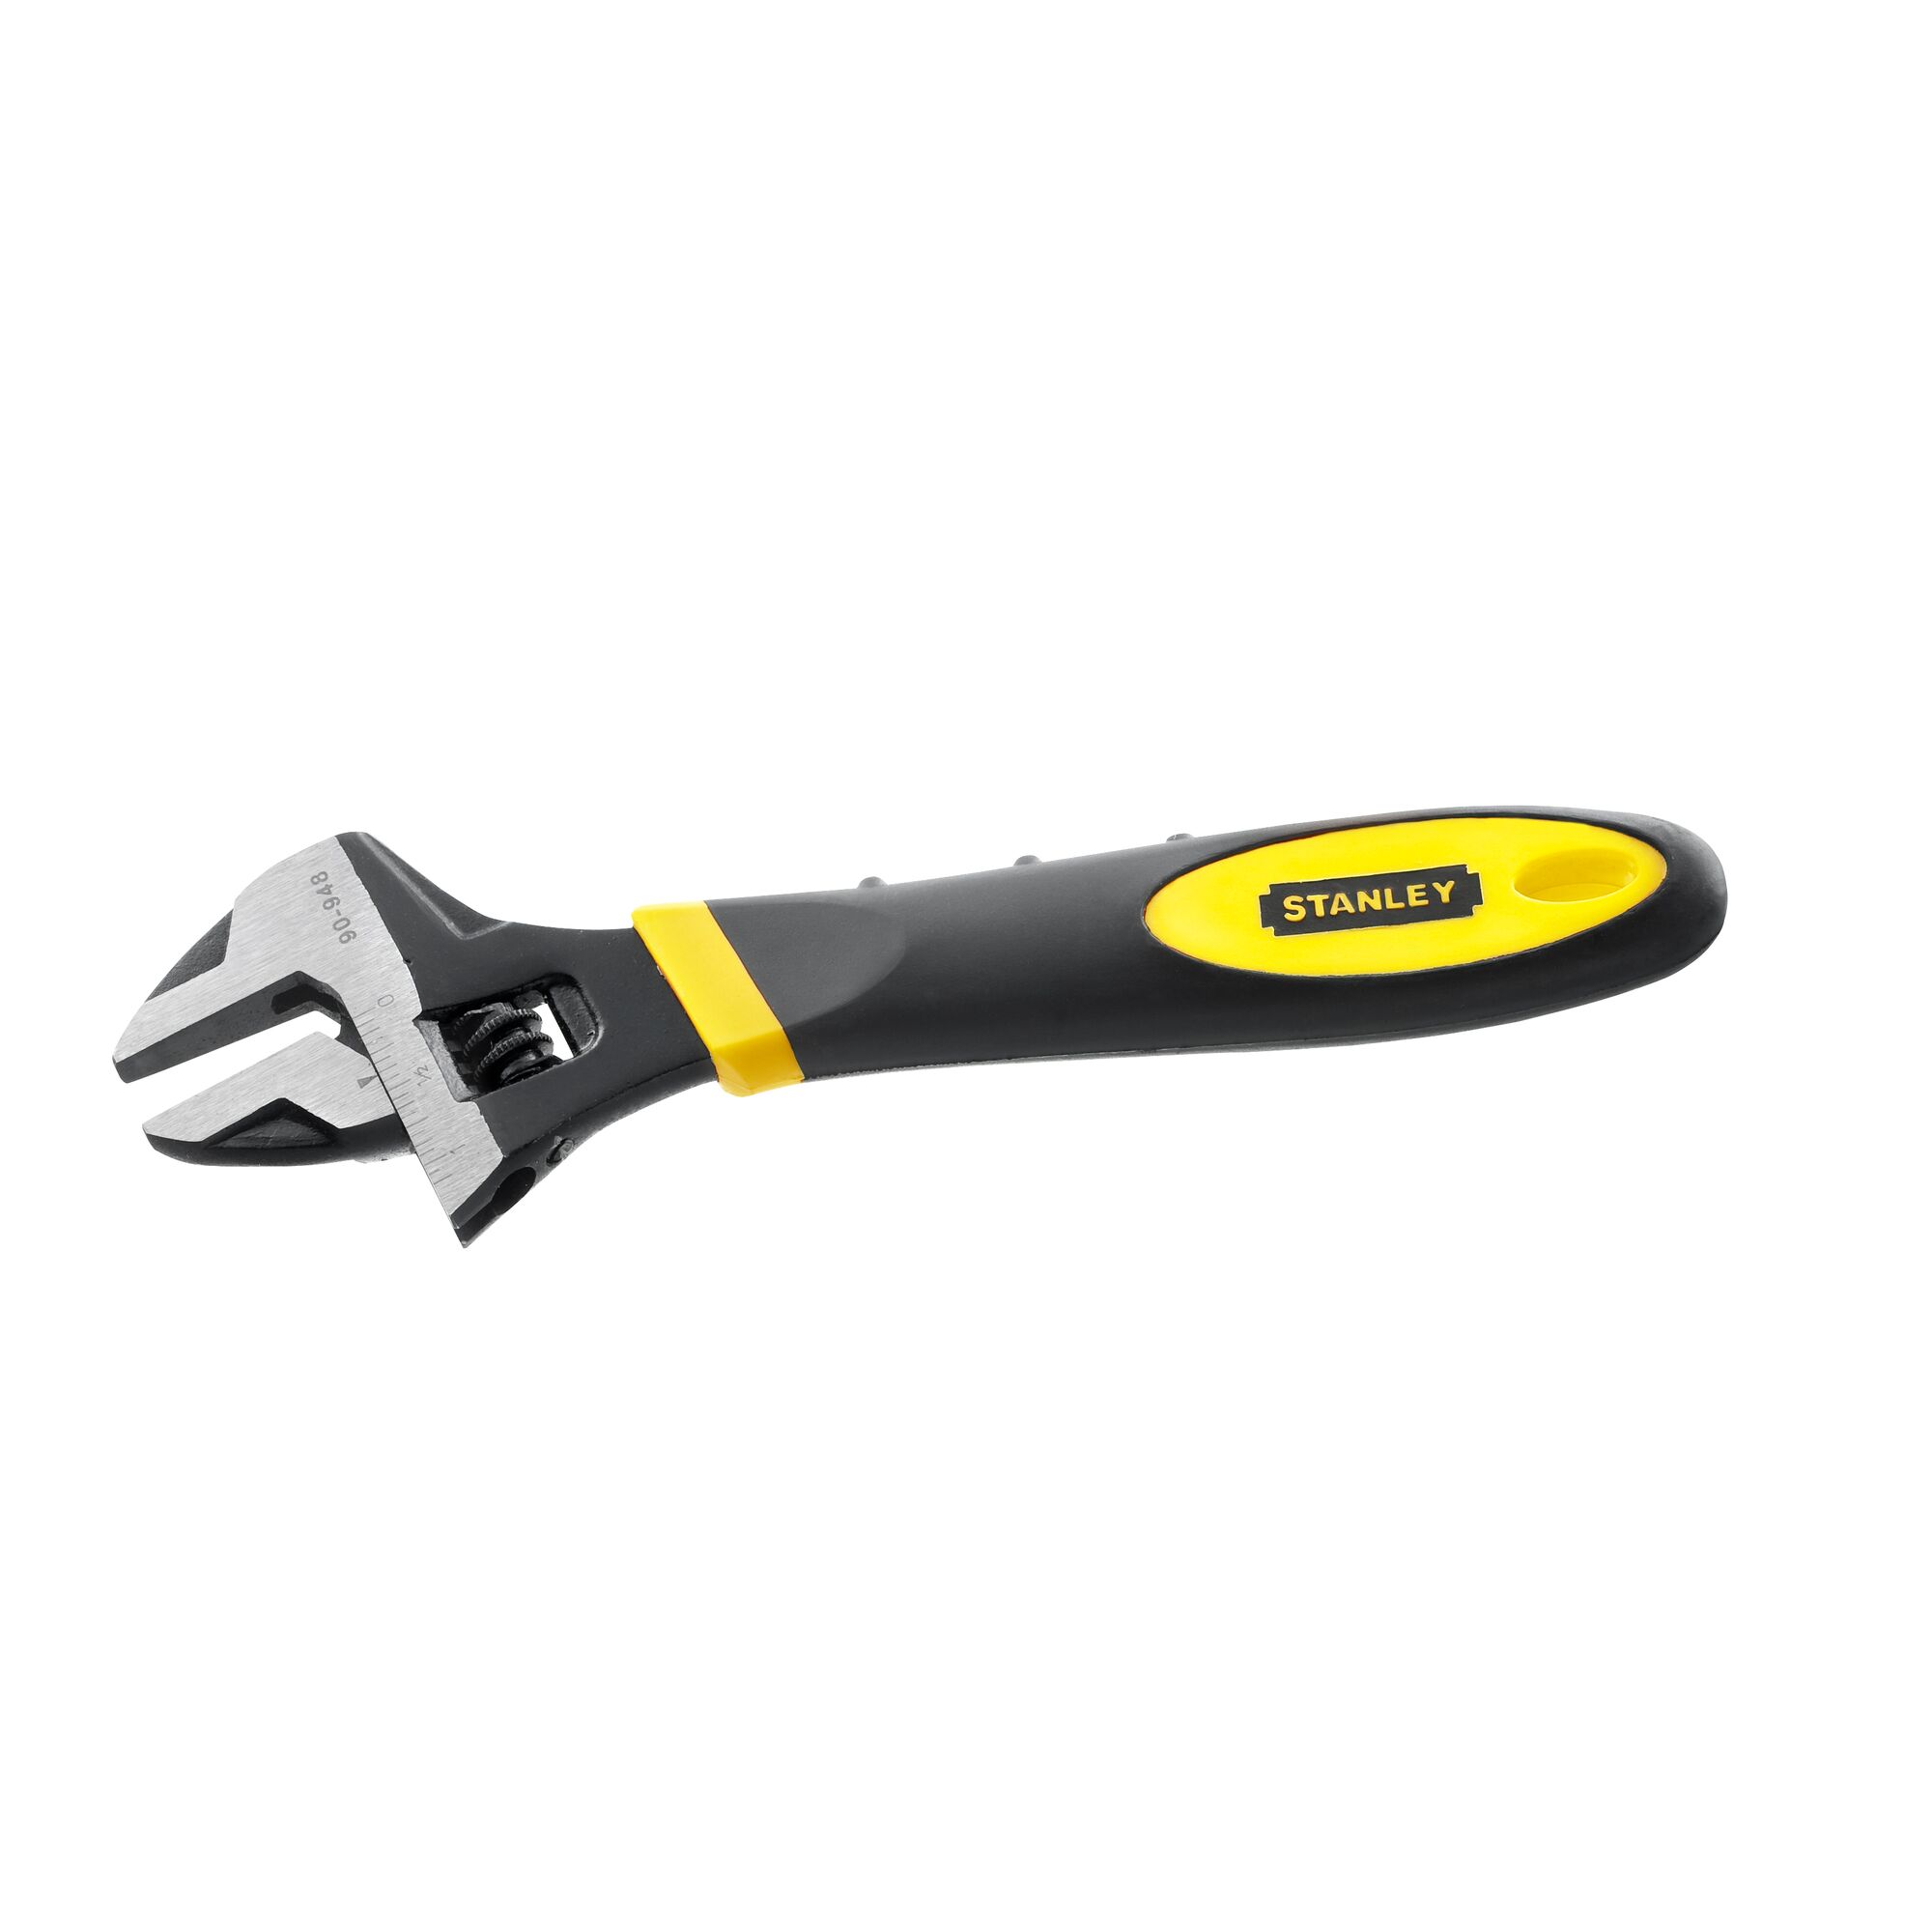 Stanley Chrome Adjustable Wrench 8in/200mm 0-87-368 